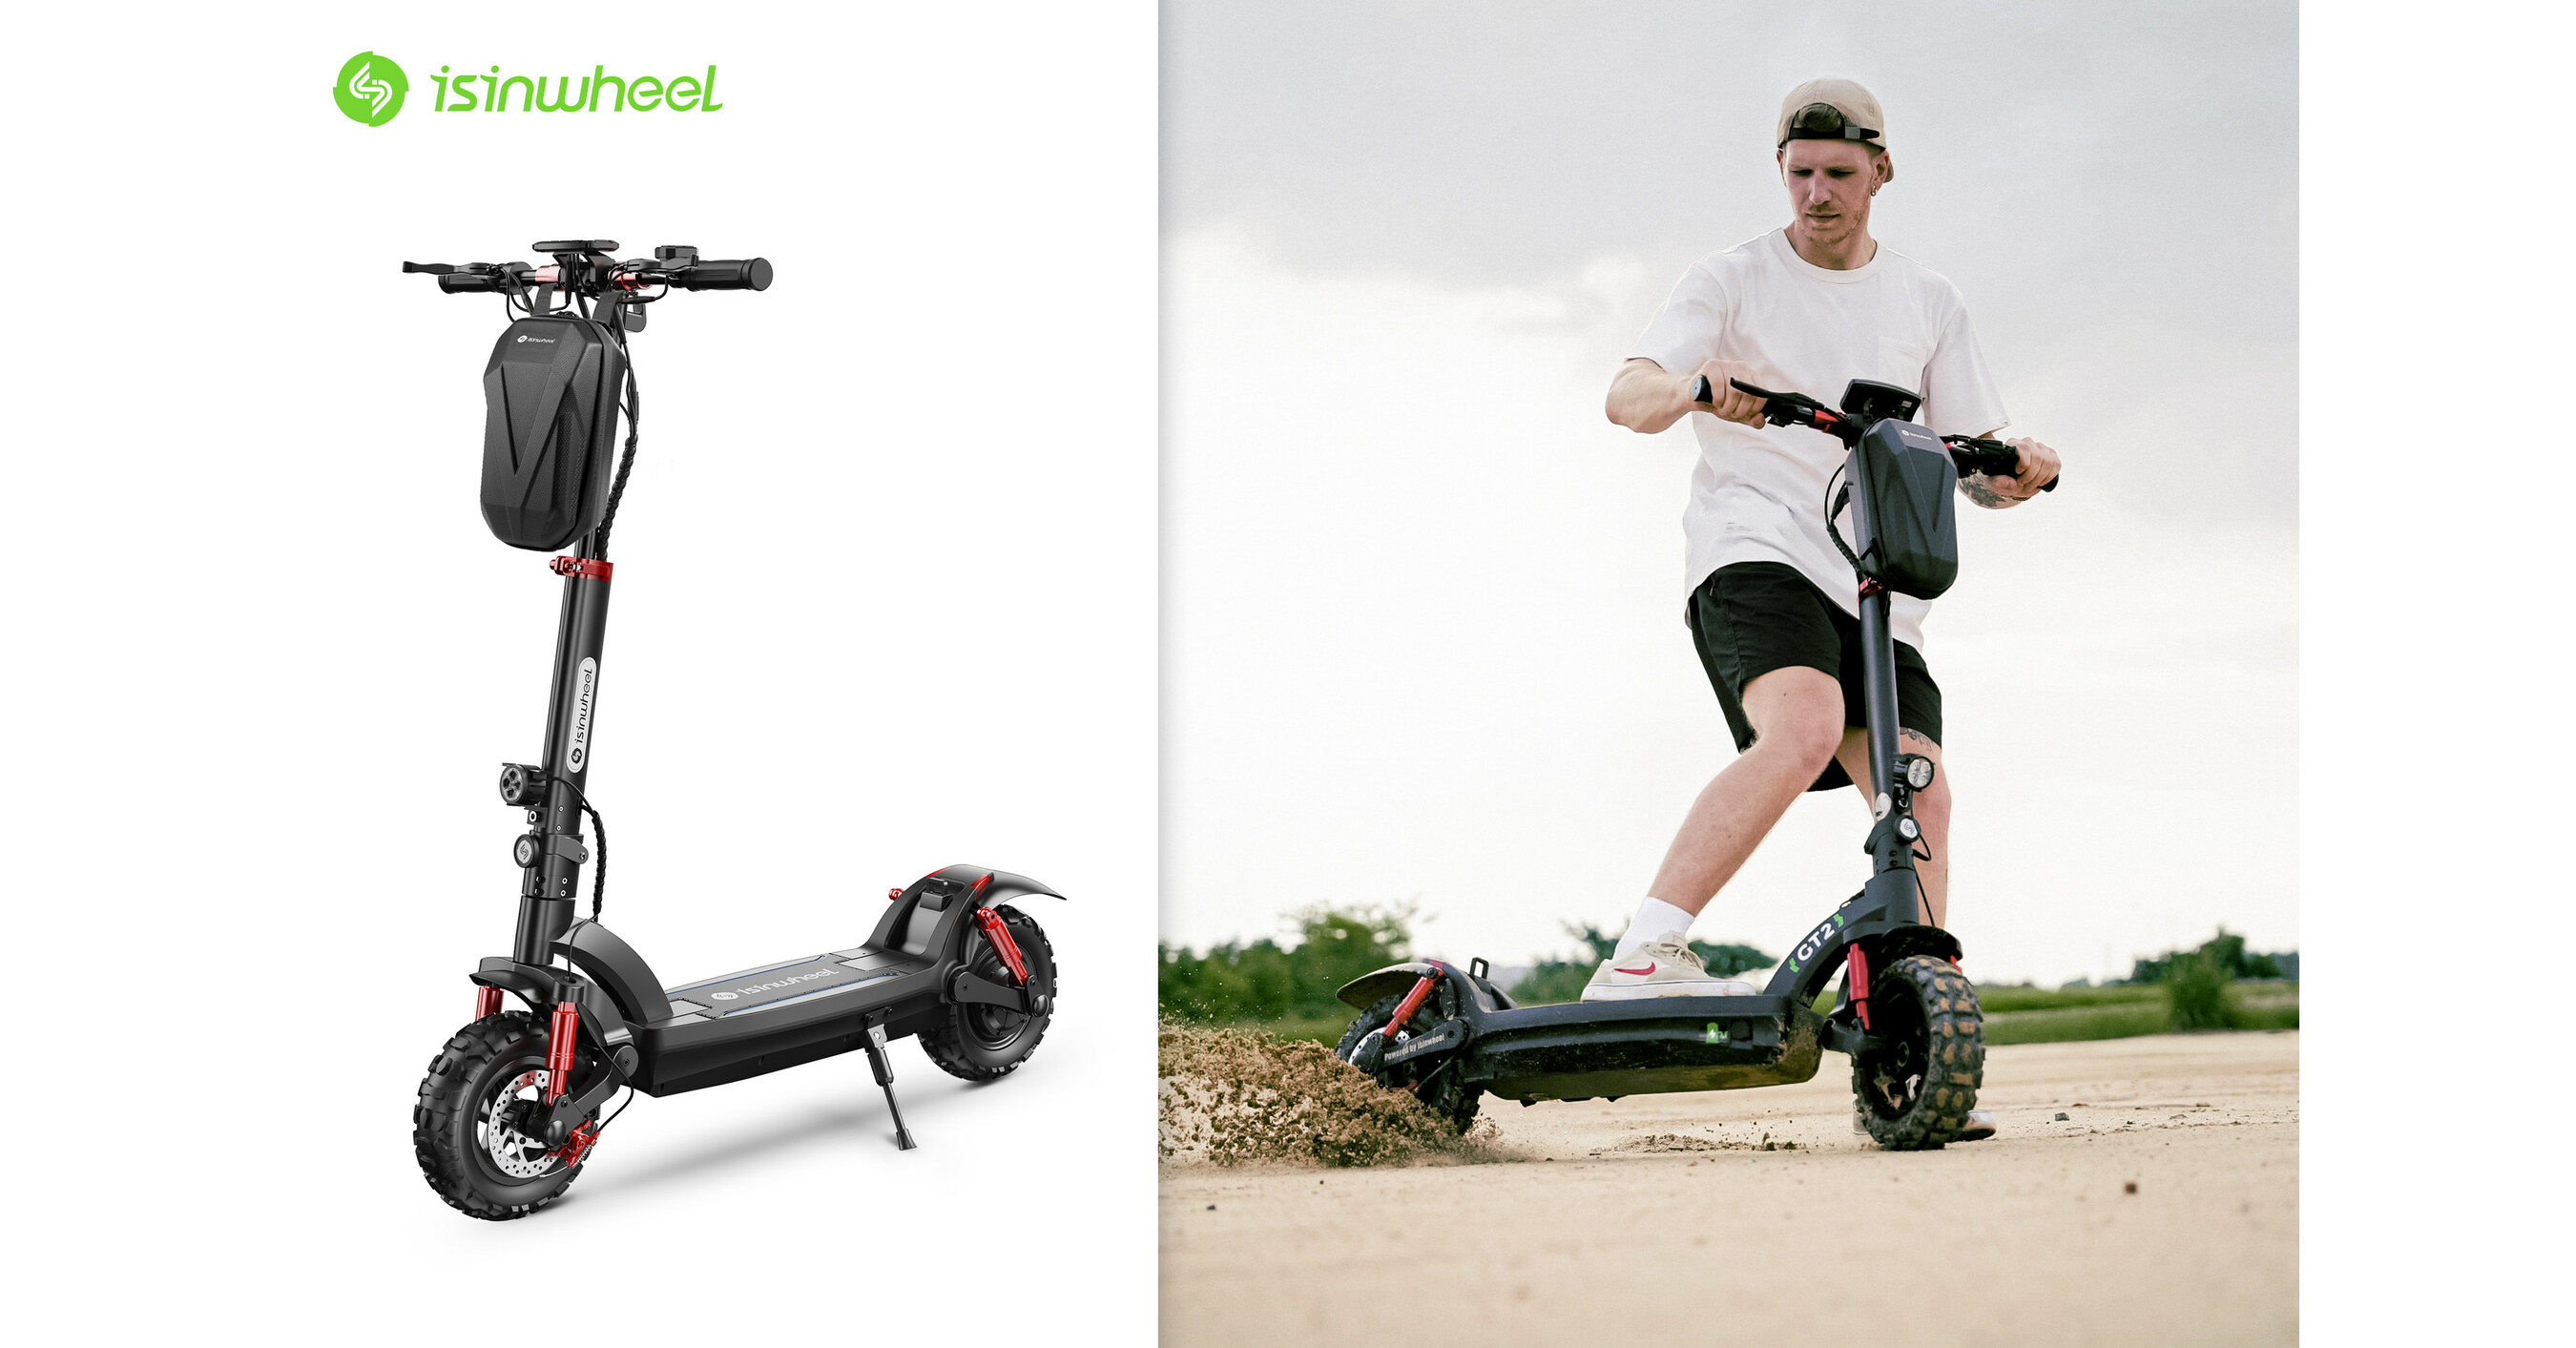 Stunt Scooter Vs Kick Scooter: Which One Reigns Supreme?